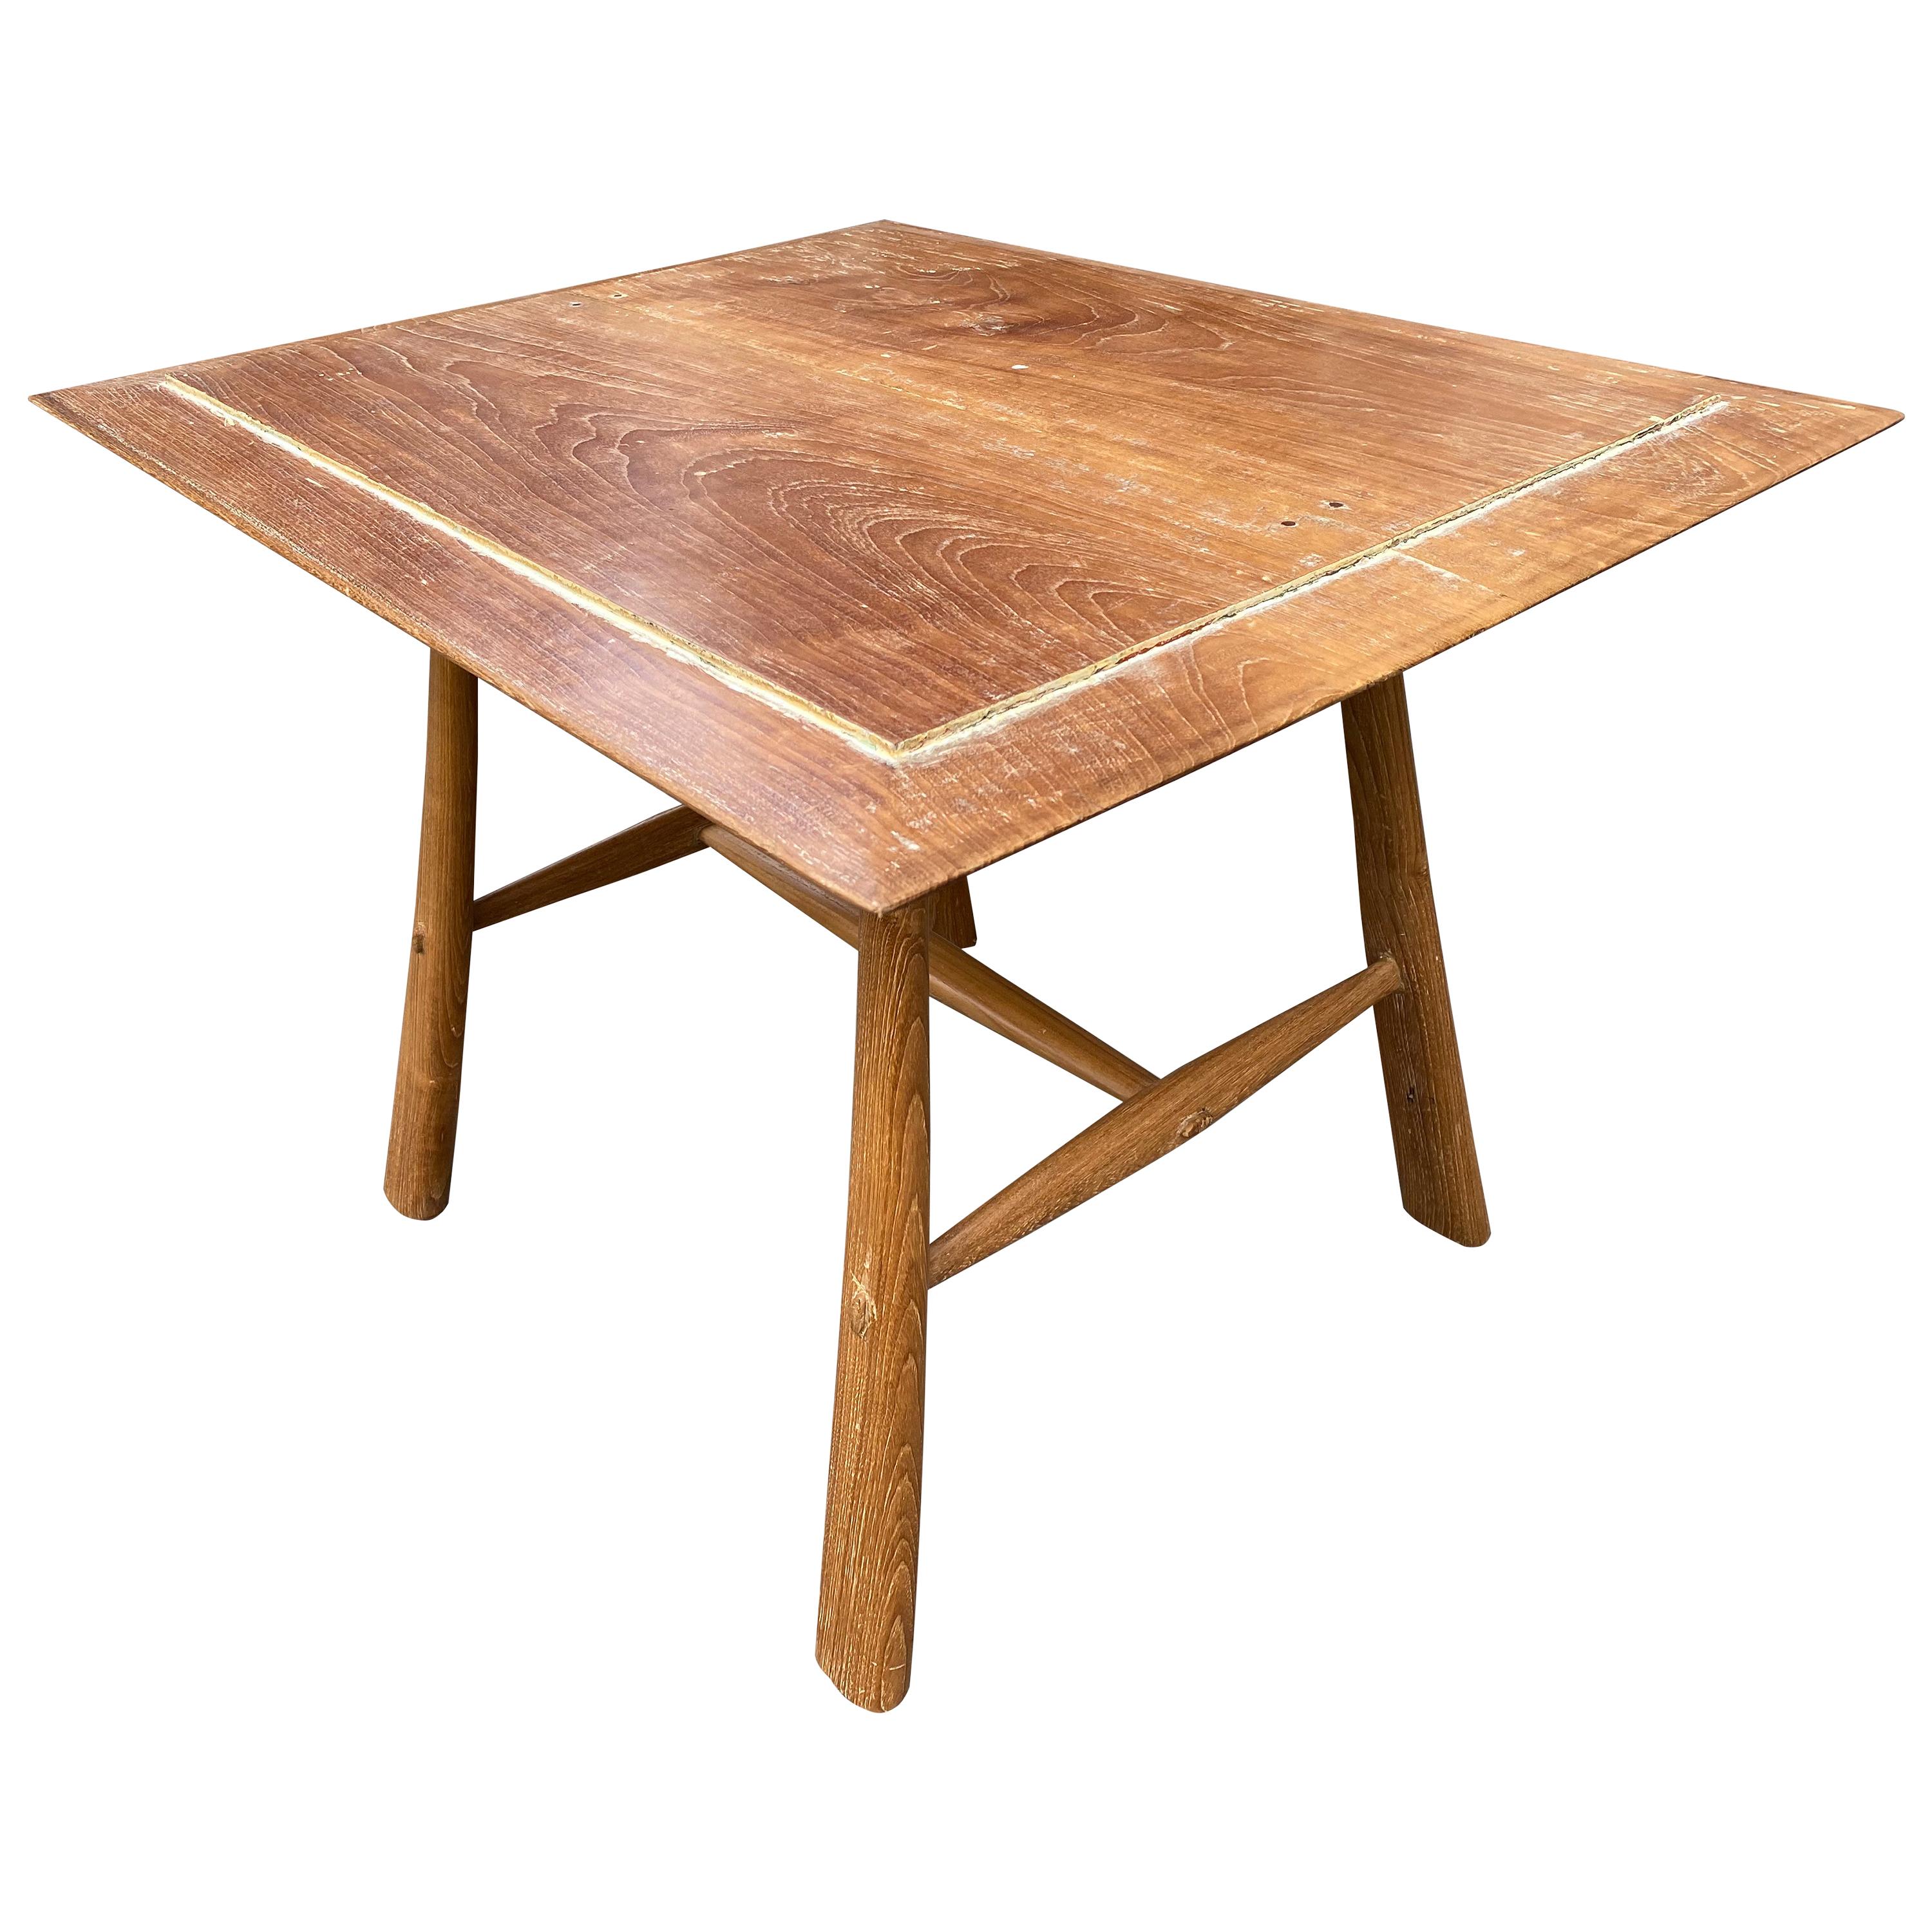 Andrianna Shamaris Midcentury Couture Teak Wood Cocktail Table or Entry Table For Sale